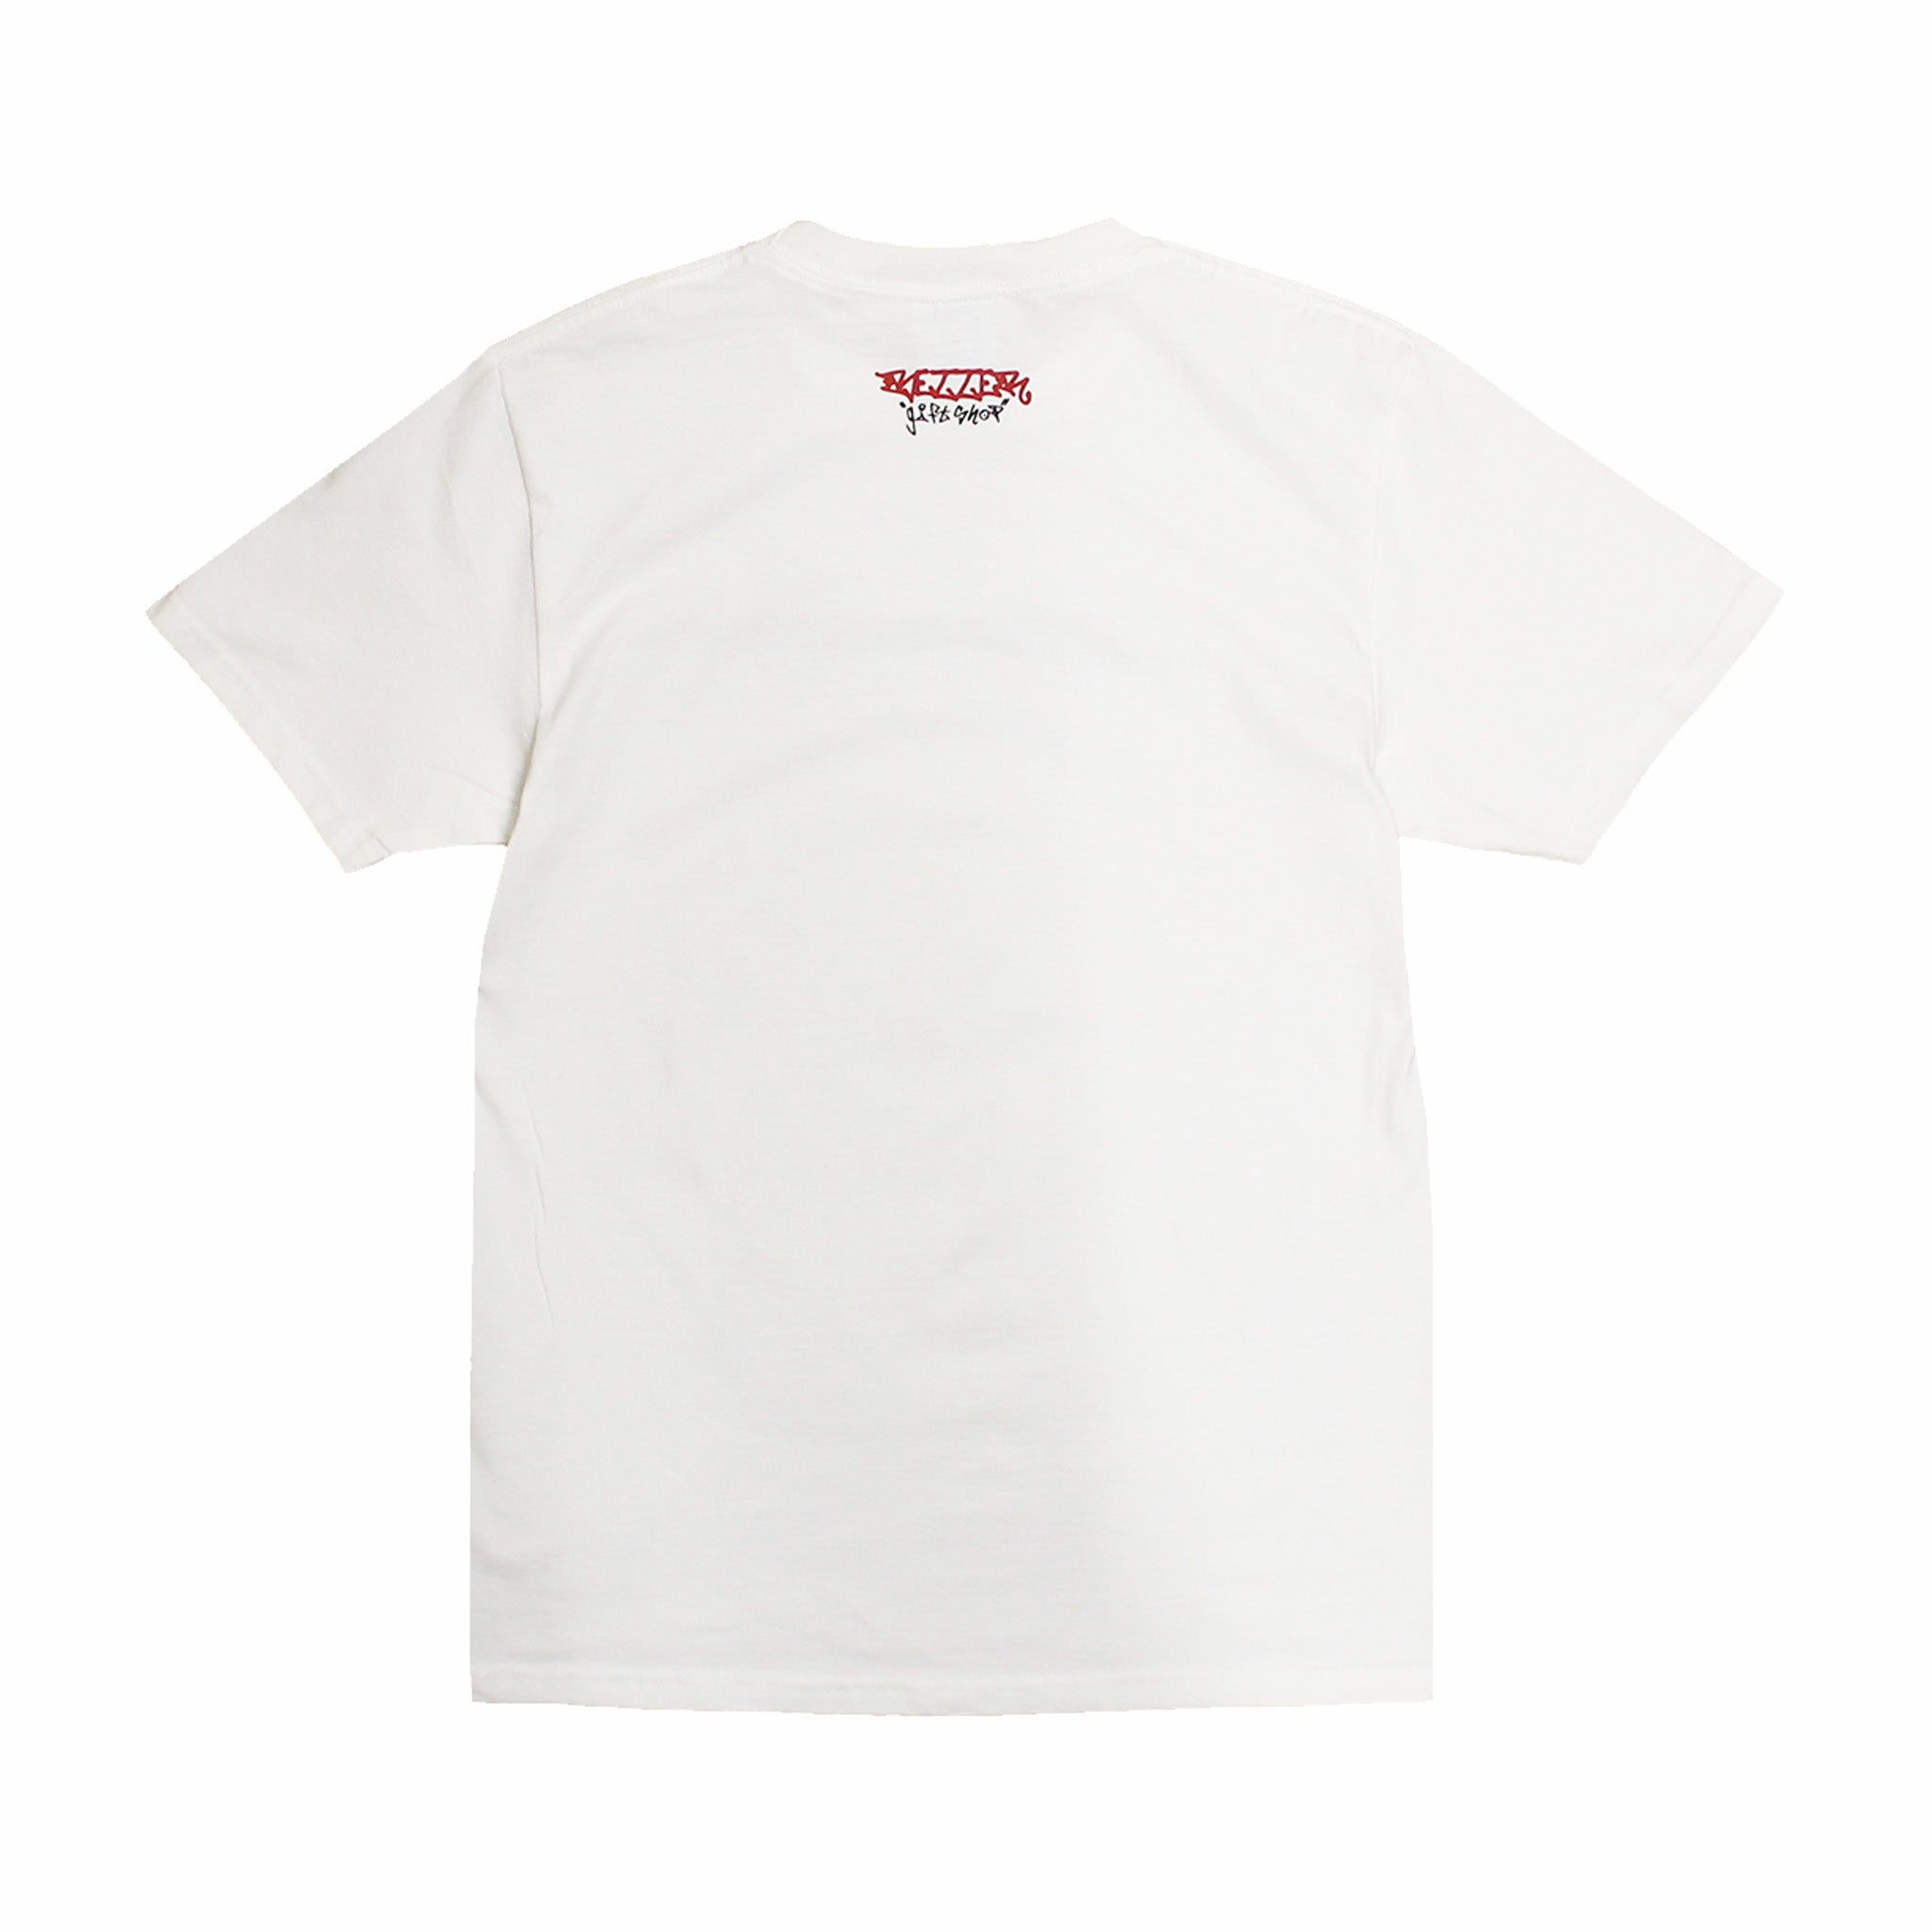 Better™ Gift Shop &quot;Throwy&quot; S/S T-Shirt (White) - August Shop